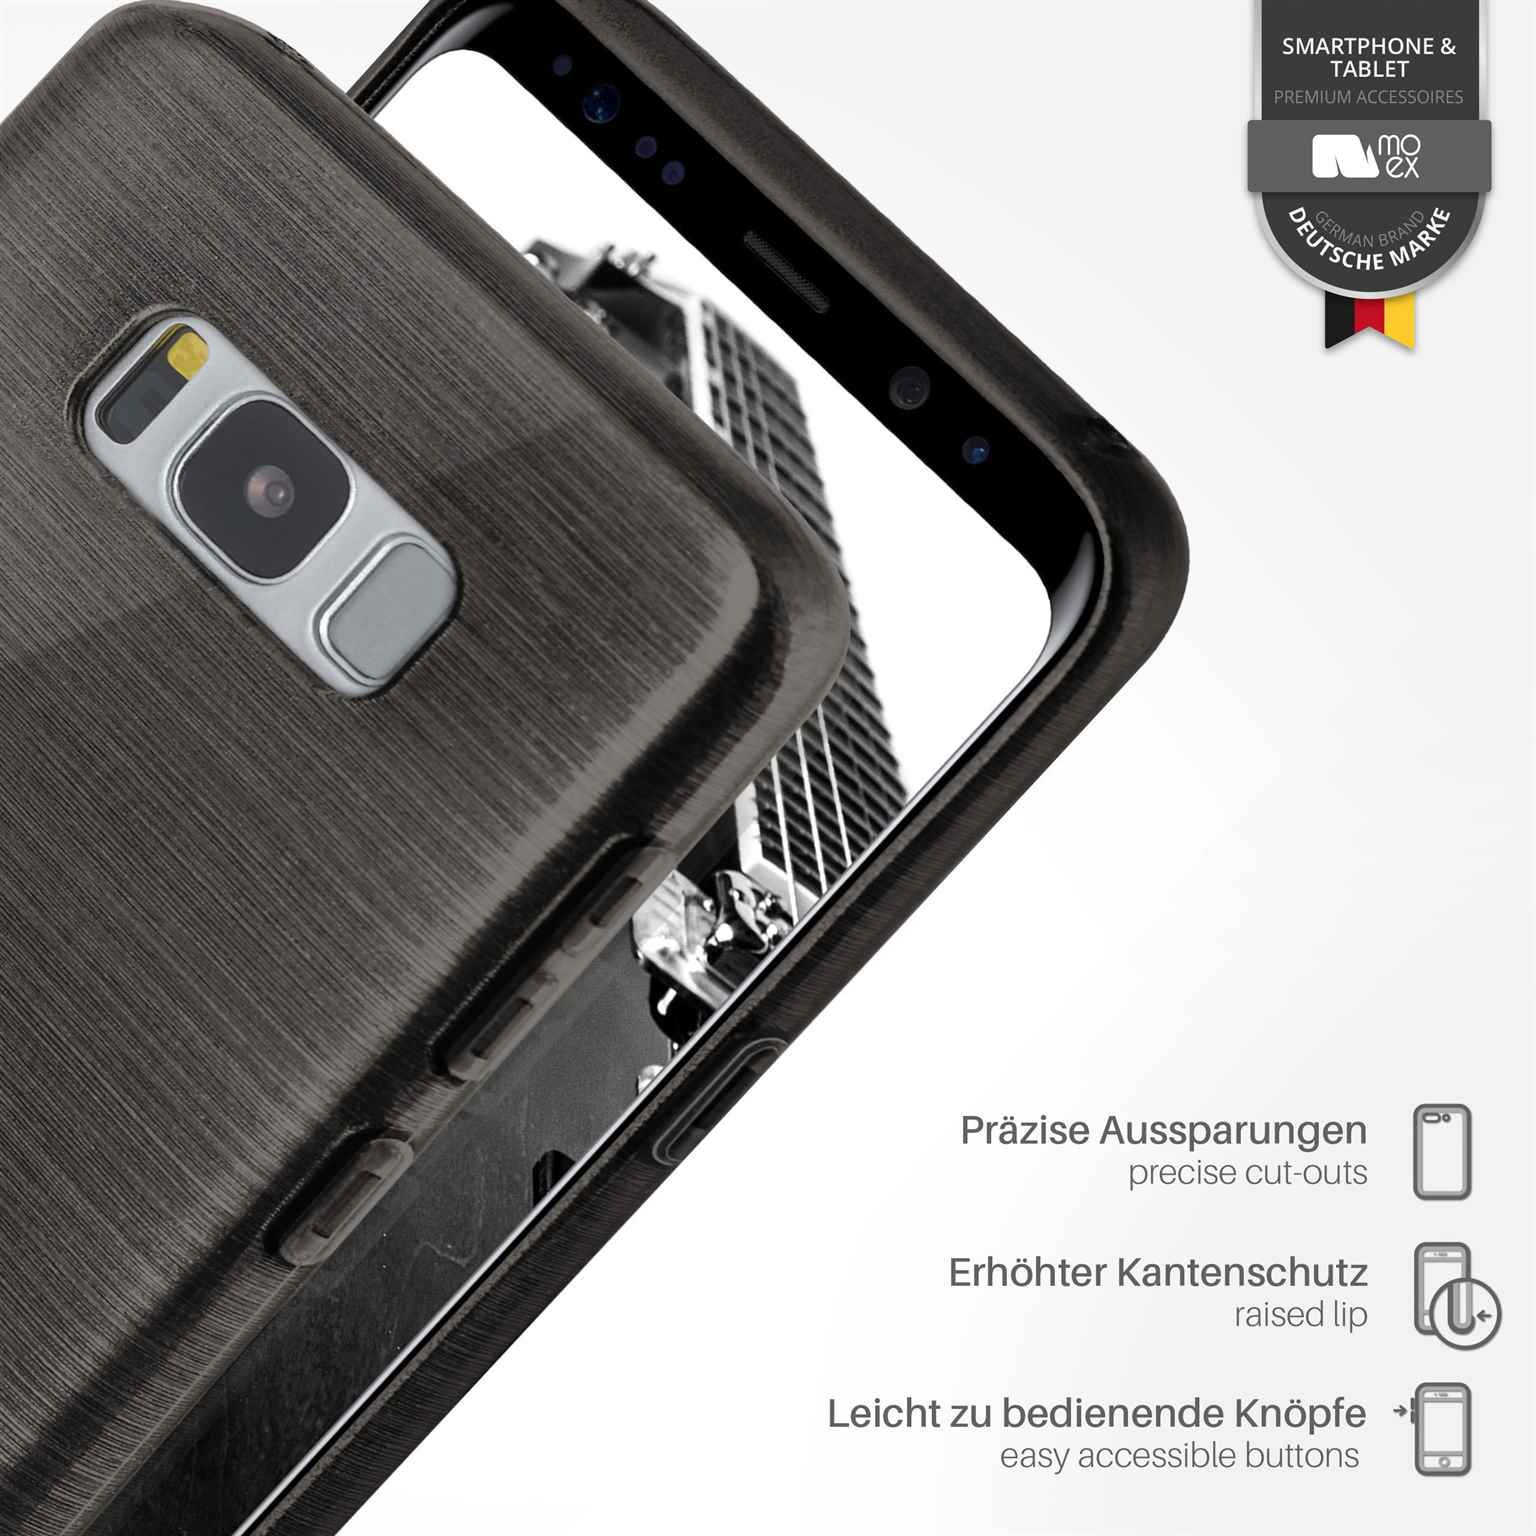 Plus, Samsung, Slate-Black MOEX Brushed S8 Case, Backcover, Galaxy